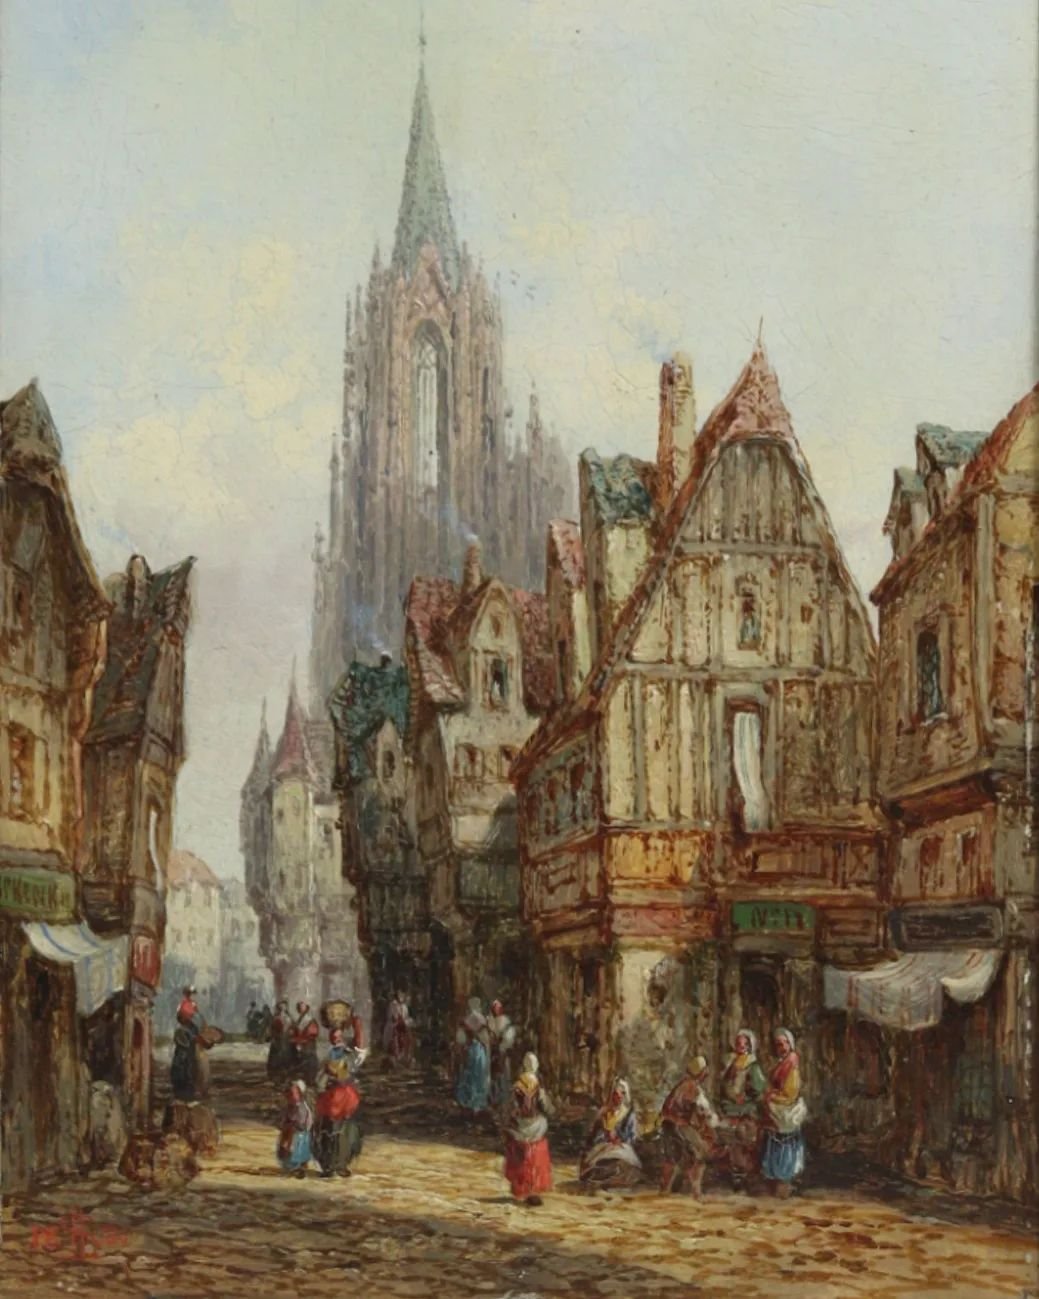 Henry Schafer (1841 - c.1914)
&quot;Chartres, France&quot;, 1881
Oil on panel

One of a pair, included in our May Fine Art &amp; Antiques Sale

Entries invited until 18th May

.

.

.

.

.

.

.

#fineart #antiques #oilpaintings #oilpainting #art #1